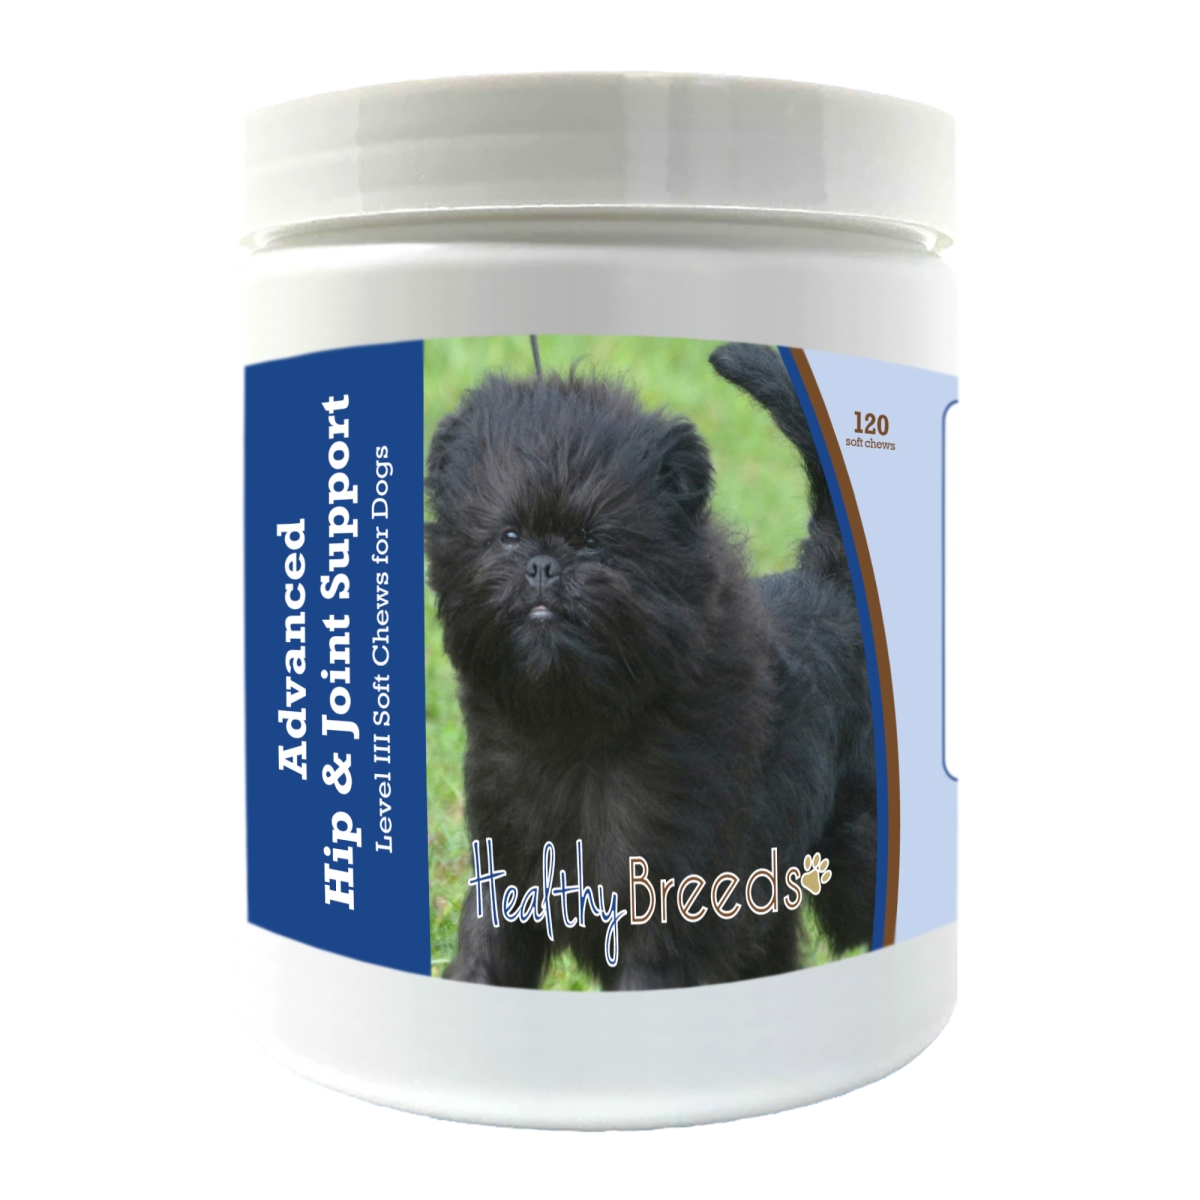 Picture of Healthy Breeds 192959897395 Affenpinscher Advanced Hip & Joint Support Level III Soft Chews for Dogs